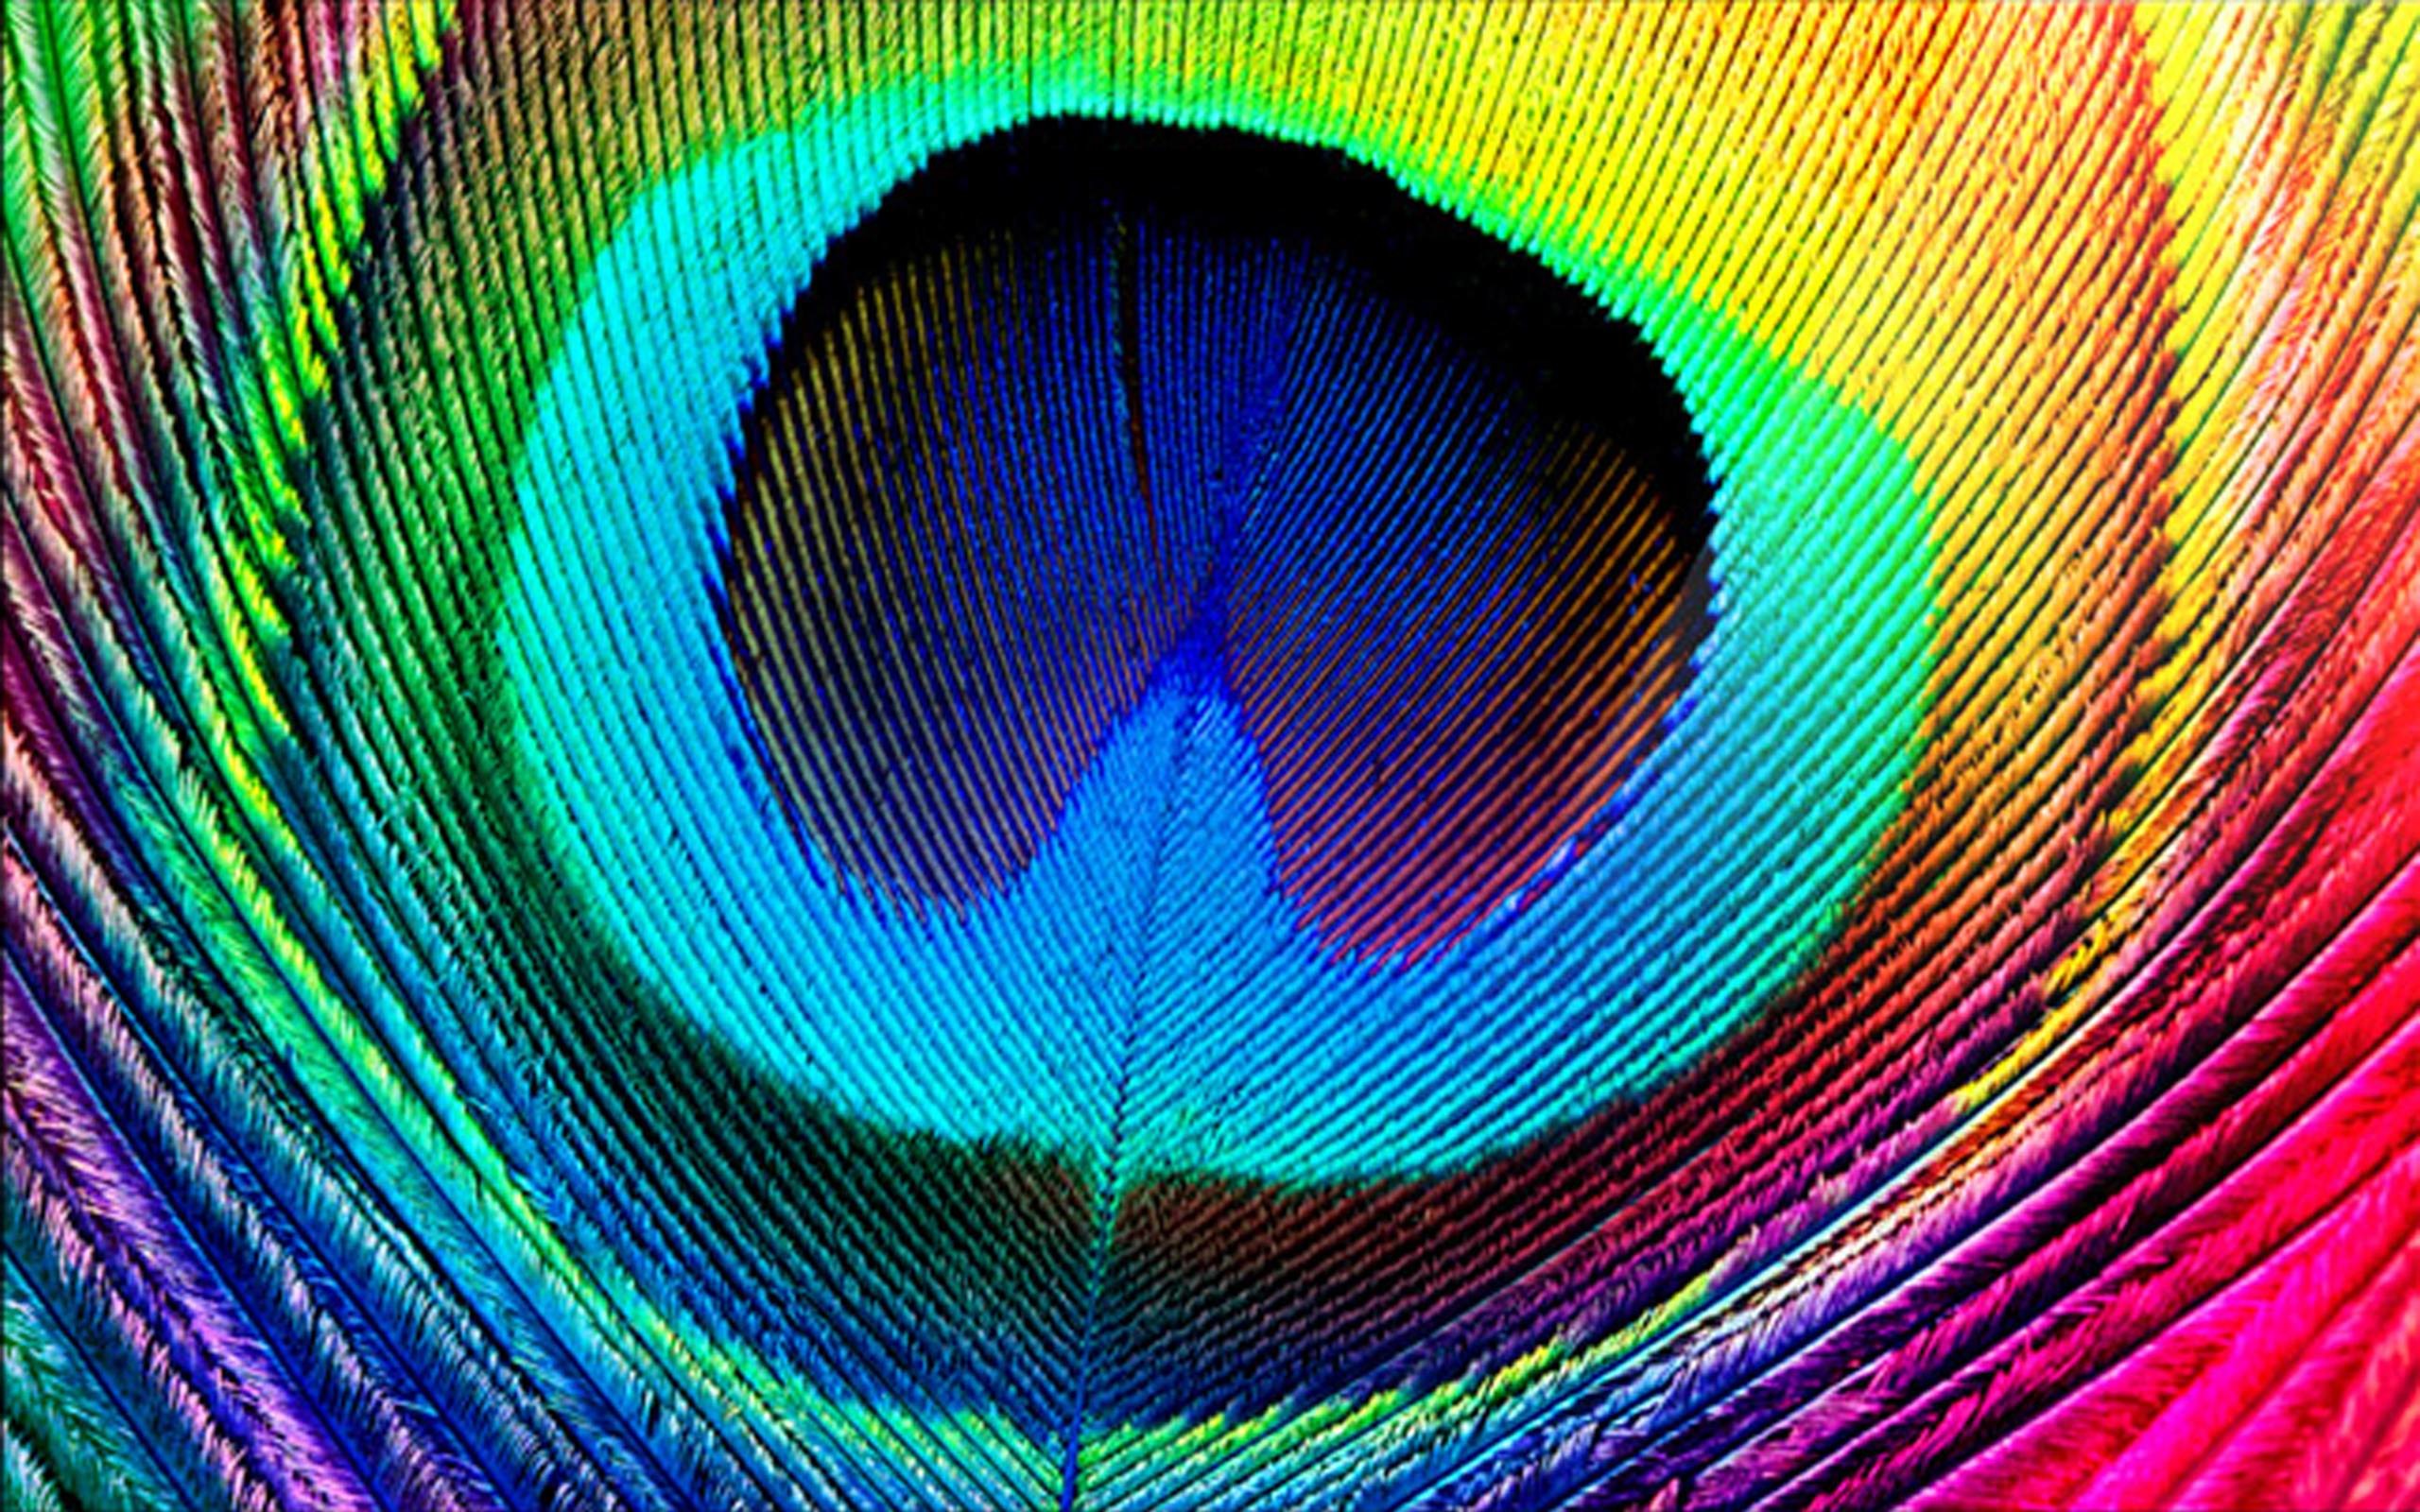 2560x1600 Closeup of a peacock feather : woahdude